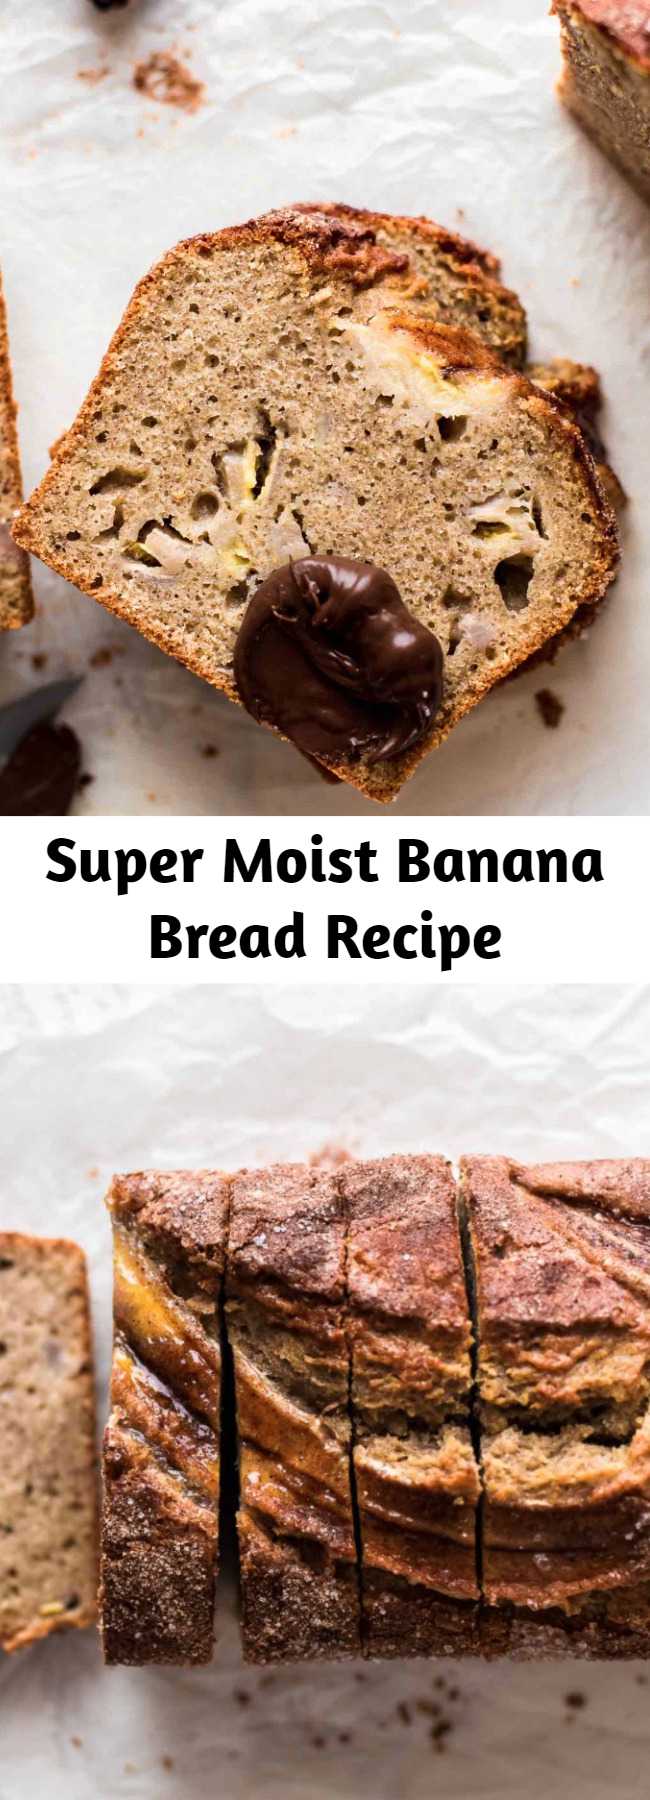 Super Moist Banana Bread Recipe - This is the only Banana Bread recipe you need. It's super moist, so easy, and prepared in just 10 minutes. Want some chocolate, peanut butter, or coconut flakes in your banana bread? No problem! I show you how to make the Banana Bread of your dreams. #baking #banana #bananabread #bread #breakfast #dessert #sweets #baking